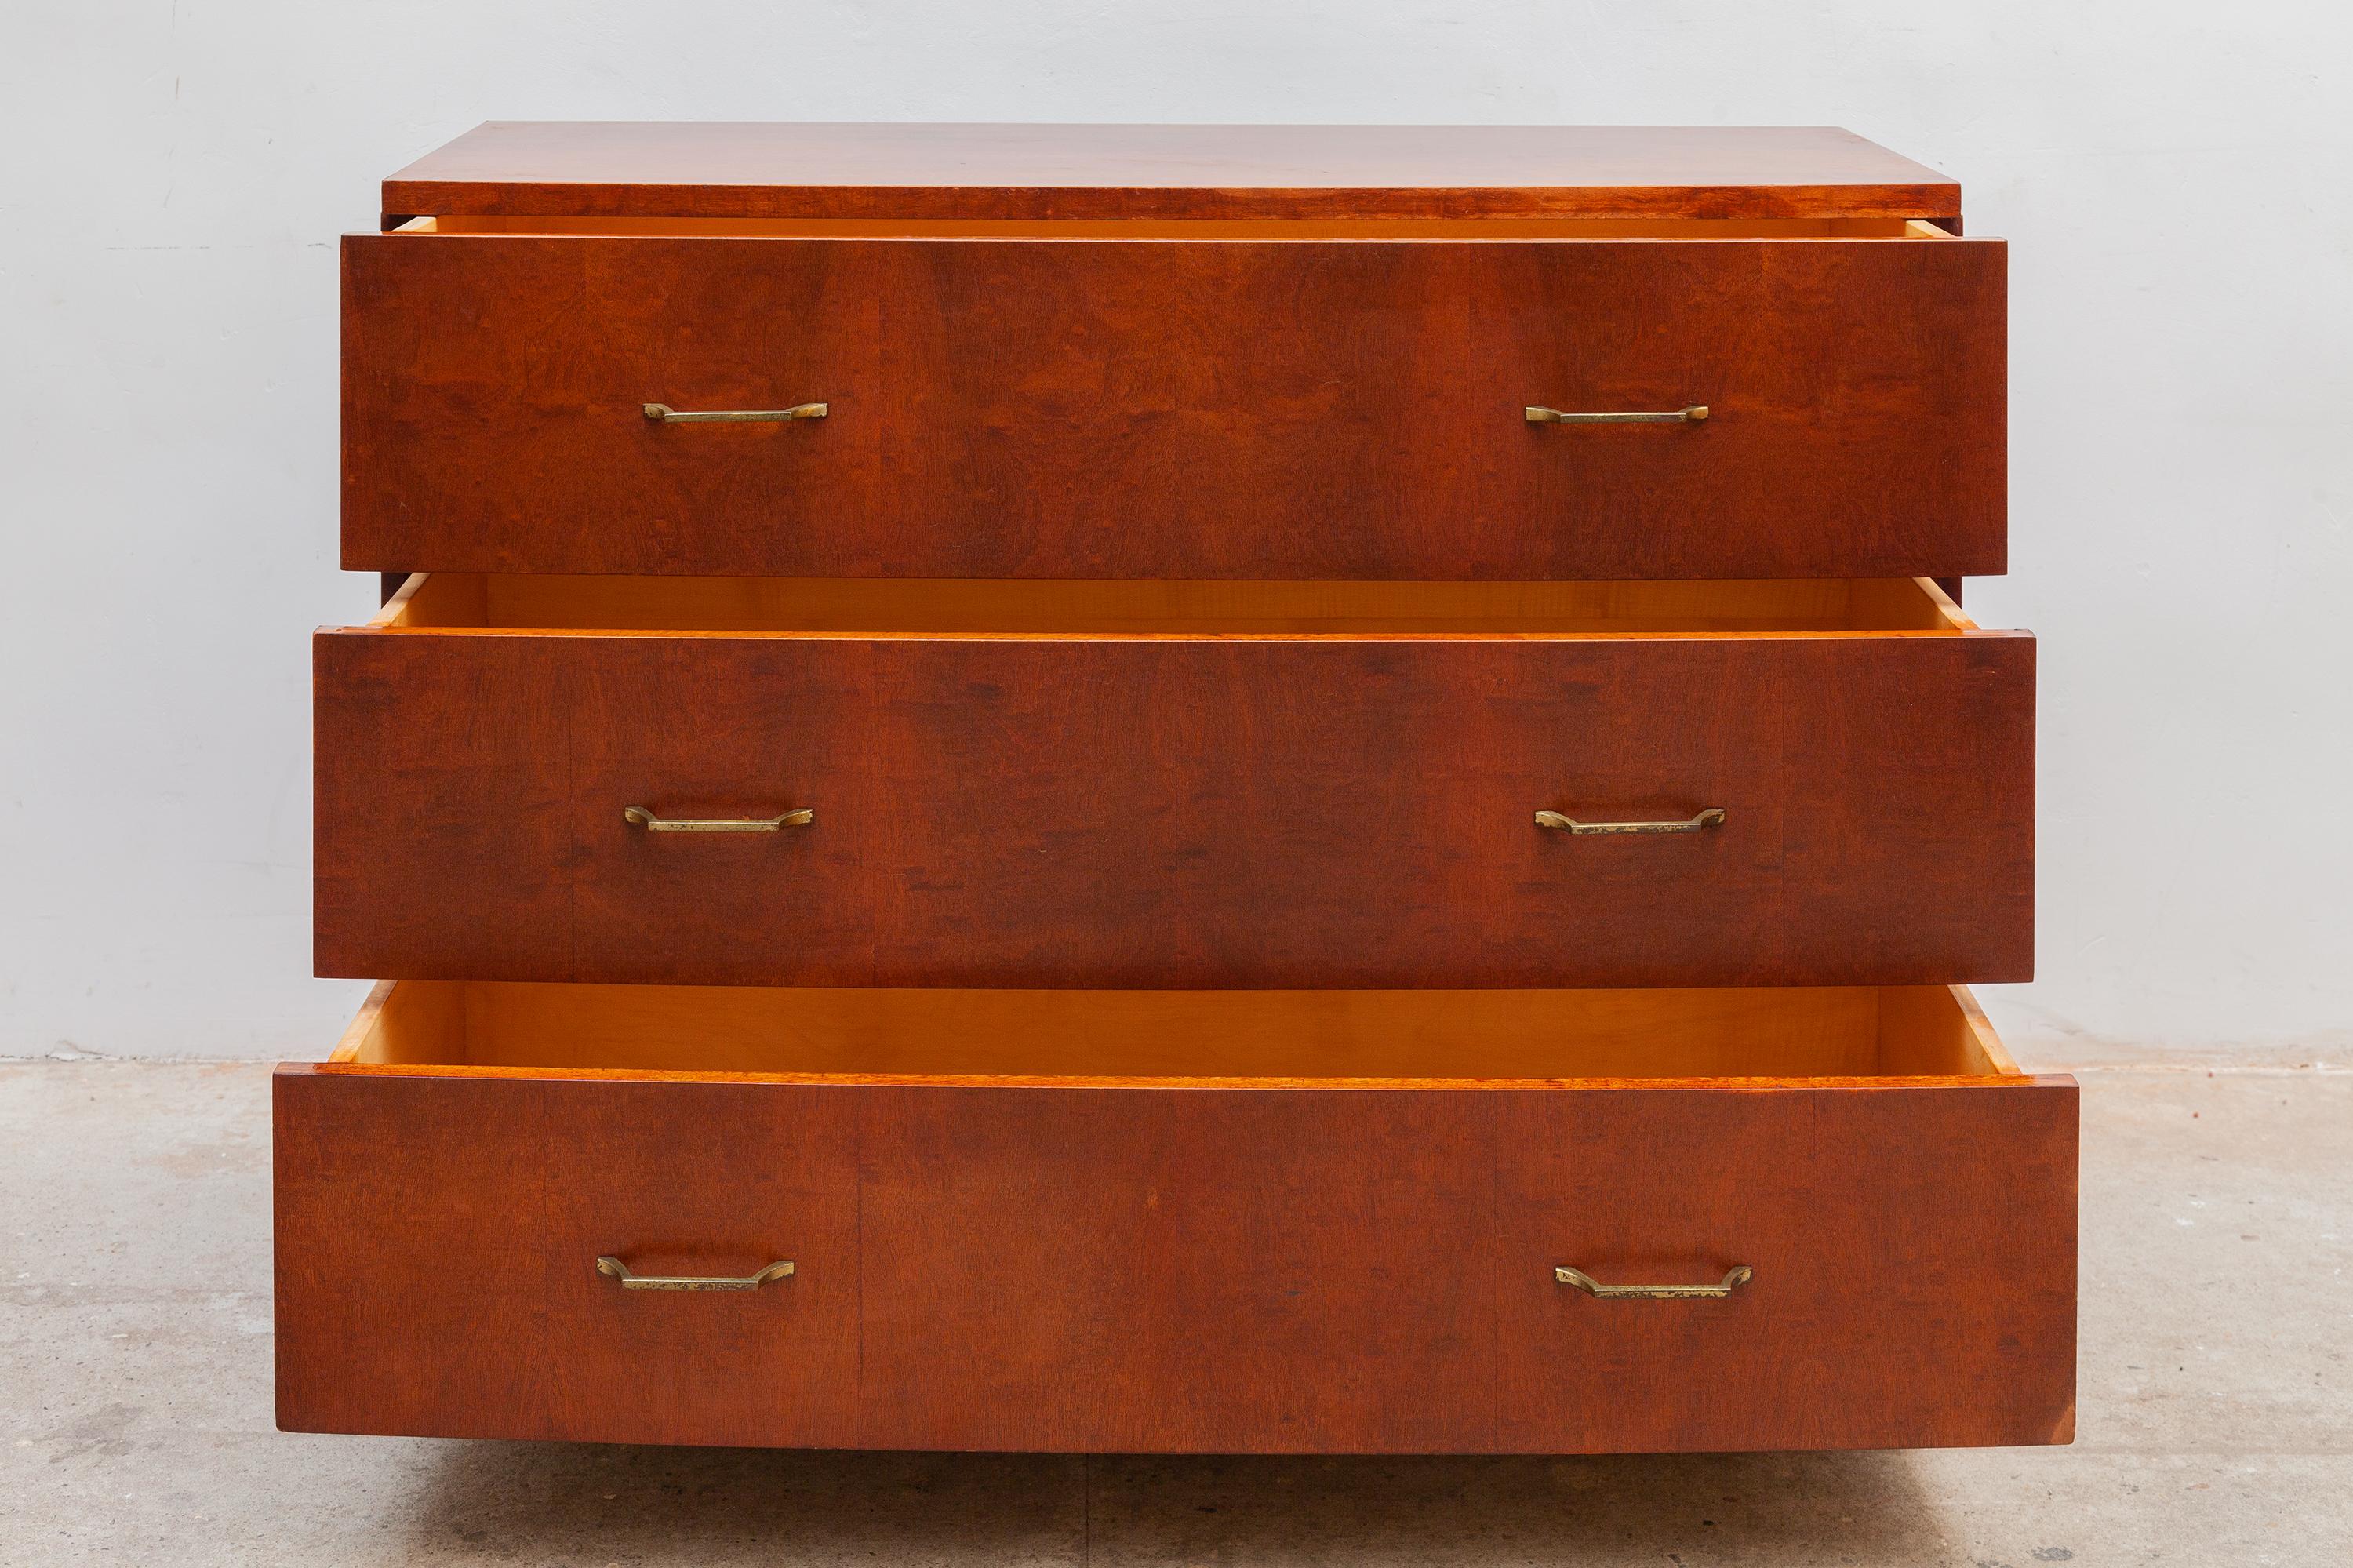 Antique Art Deco dresser in beautiful cherry colored veneer and sculptural feet. Three drawers with brass hardware.
Dimensions: 114 W x 88 H x 48 D cm.